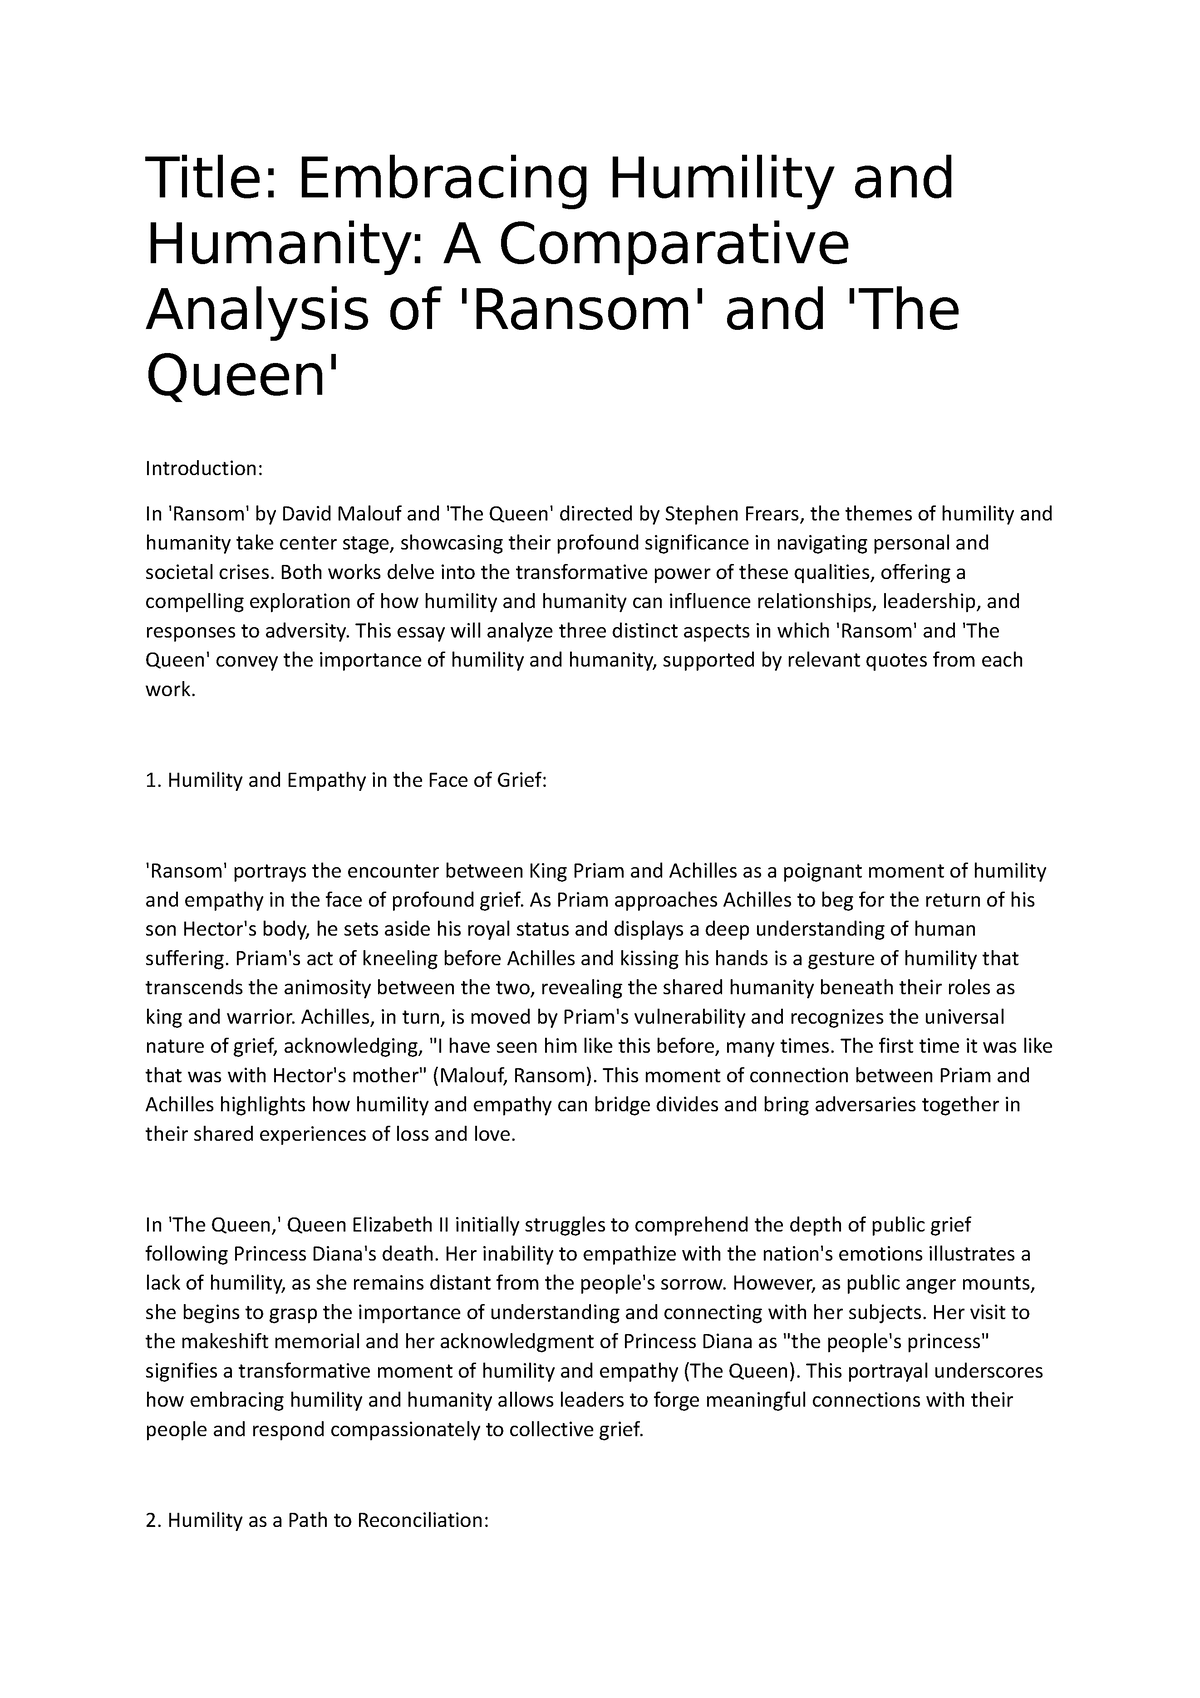 ransom and the queen comparative essay example